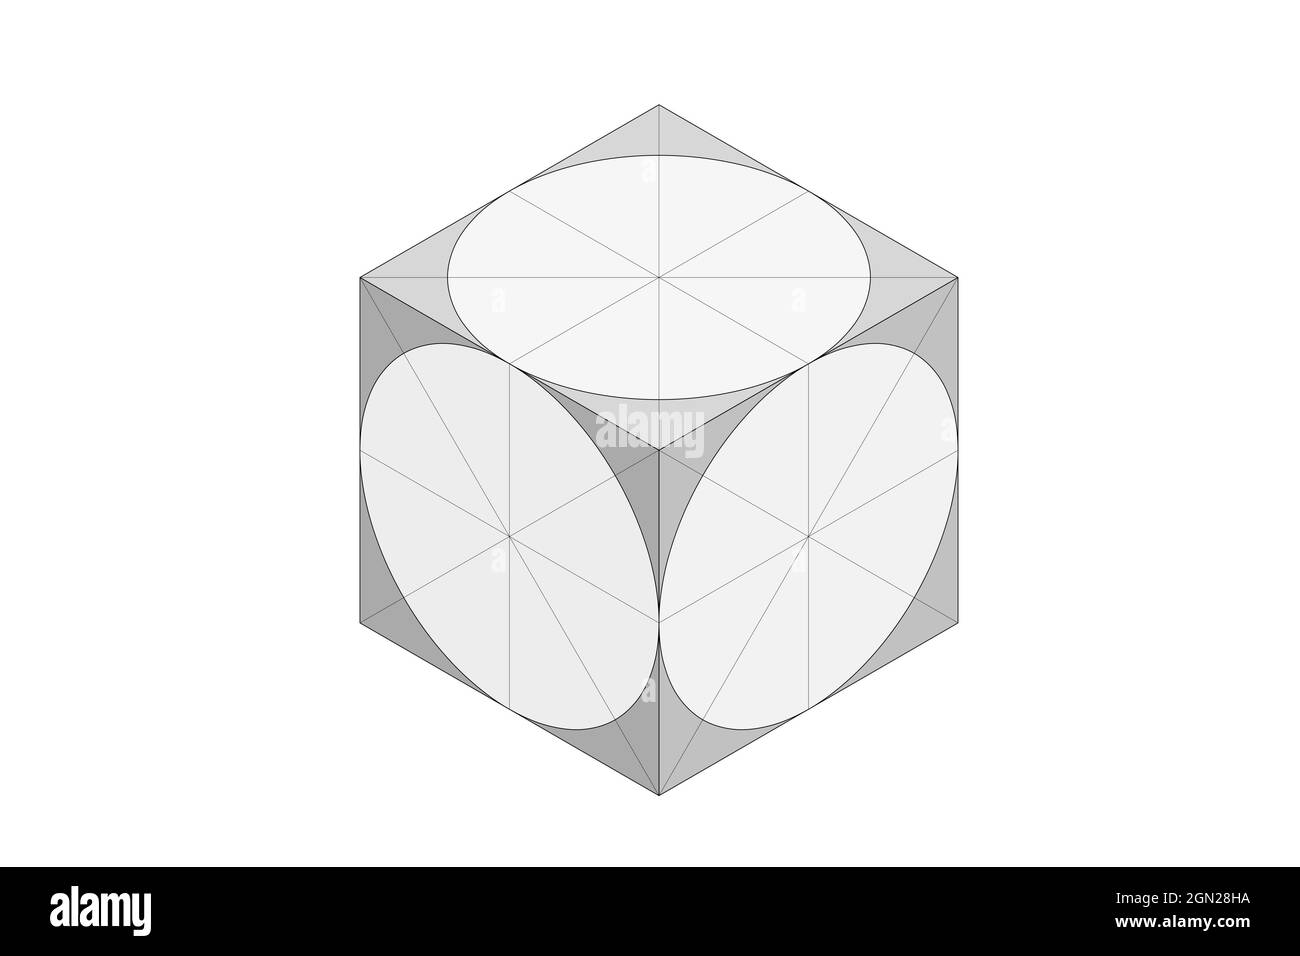 isometric drawing of a cube with circles inscribed Stock Photo